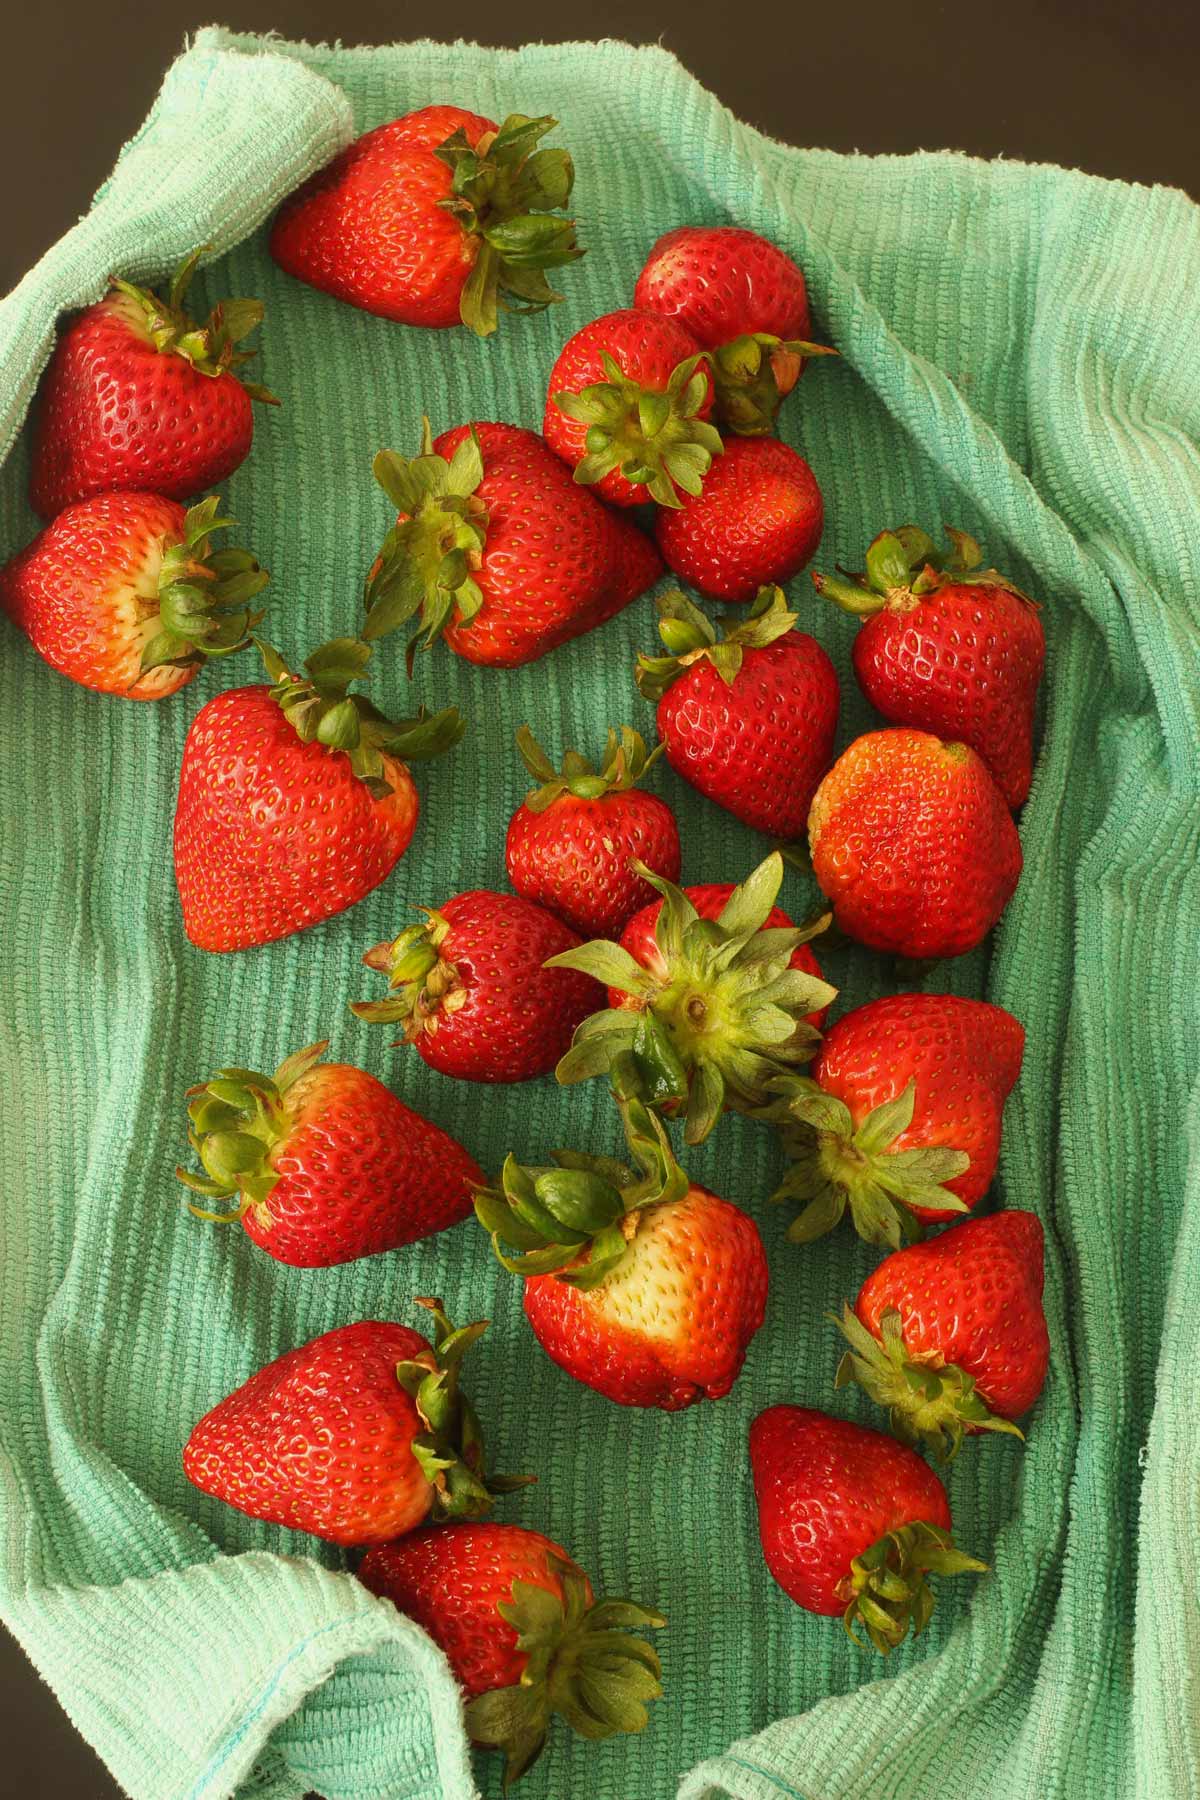 washed strawberries drying on teal kitchen towel.